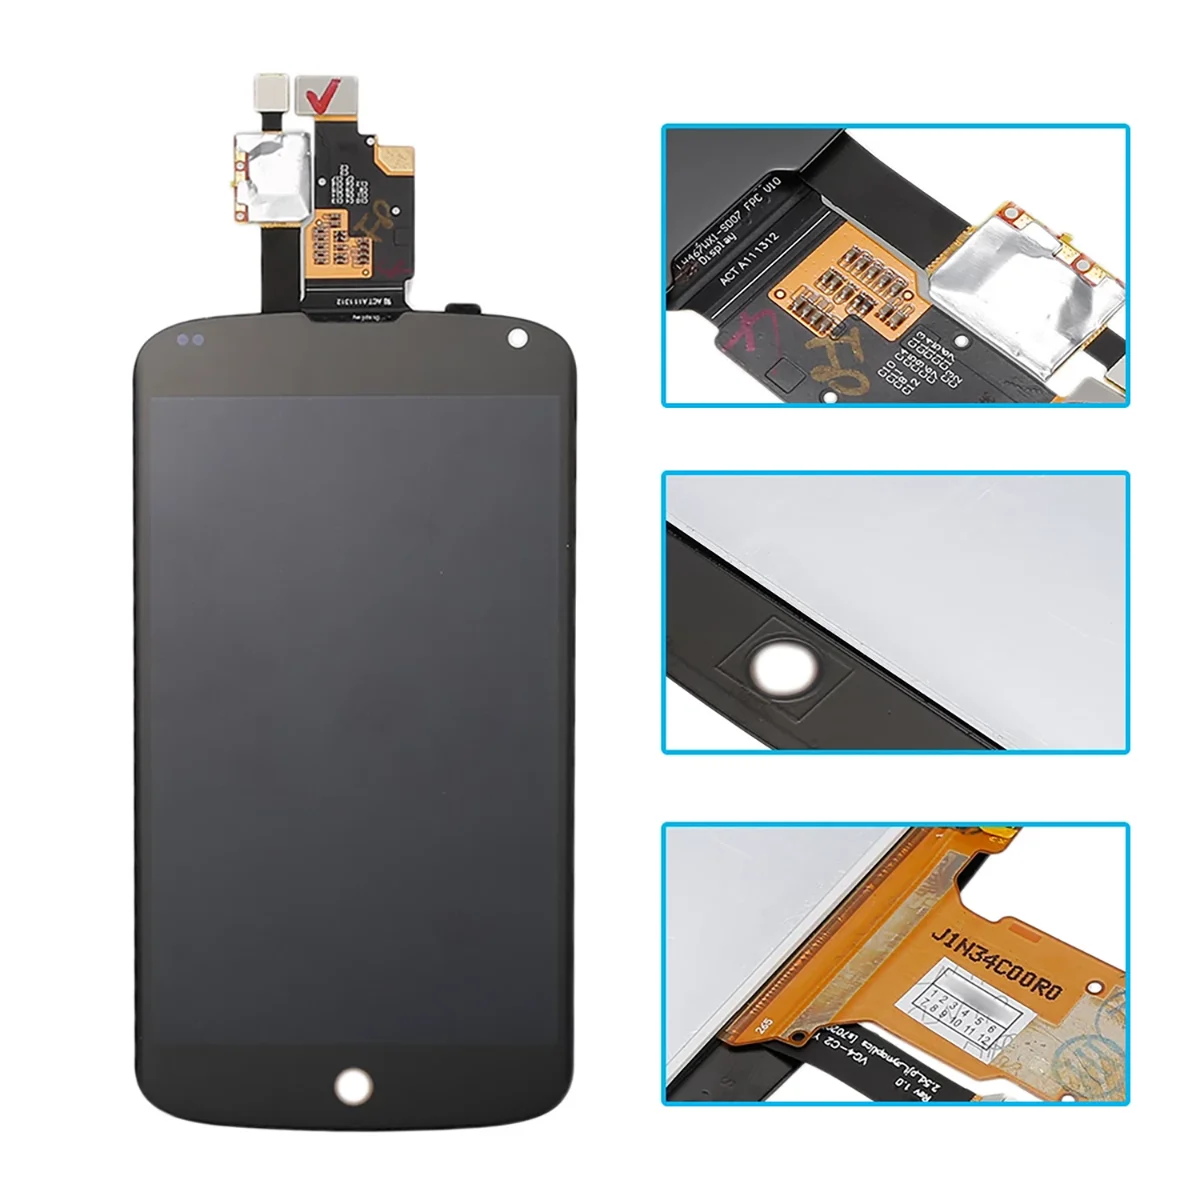 Wholesale Original For LG Lcd Display with Led Display For LG Nexus 4 Mobile Phone LCDs